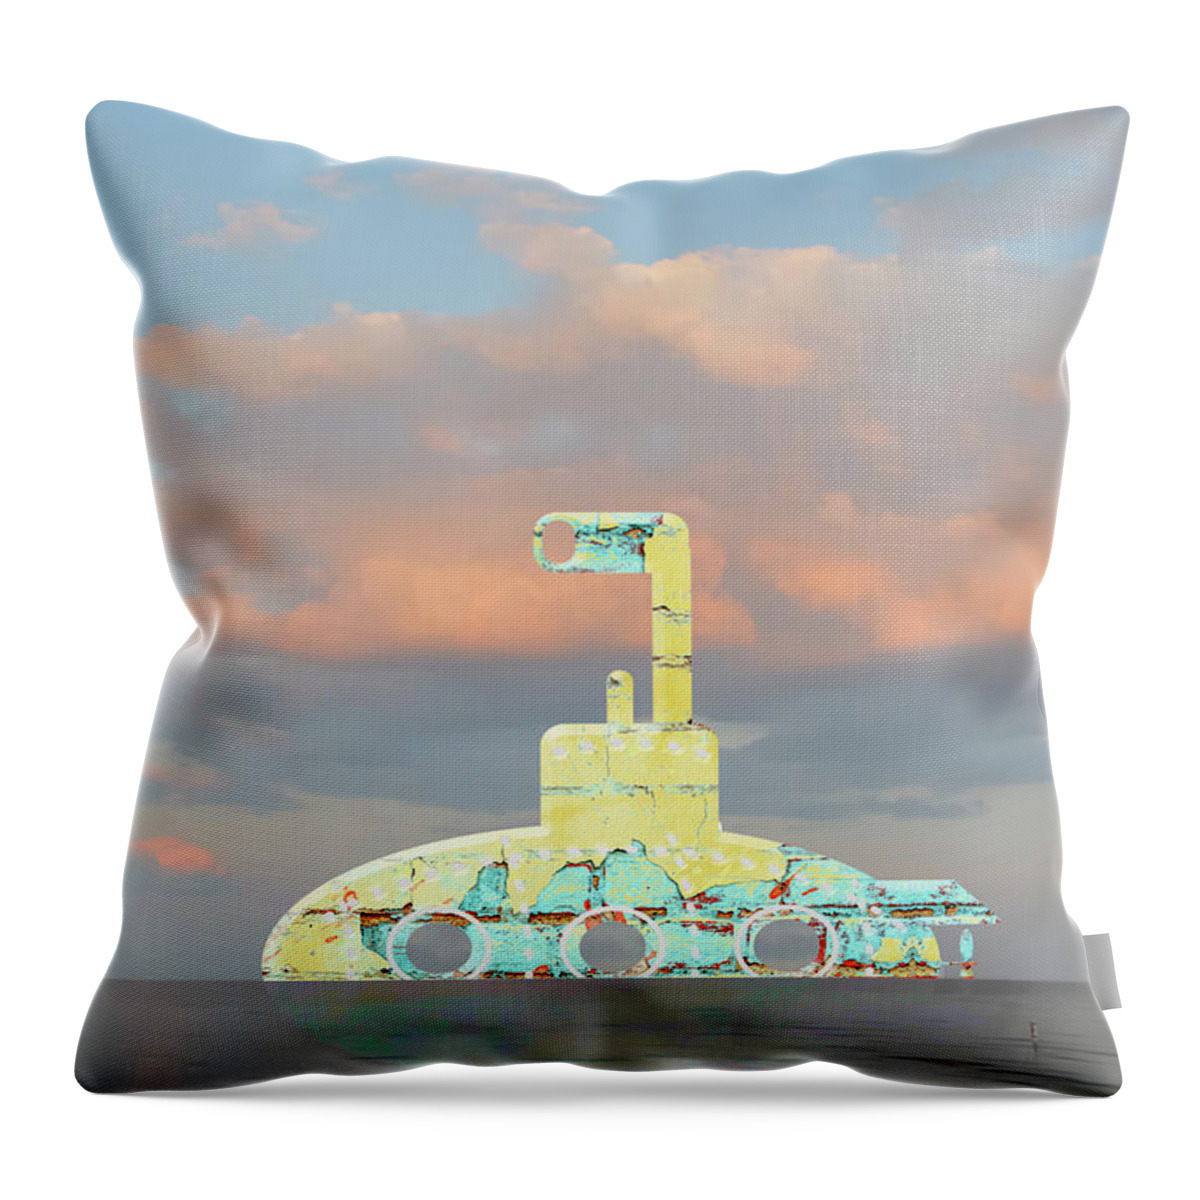 Yellow Throw Pillow featuring the digital art Zany Yellow Submarine at Sunset by Marianne Campolongo